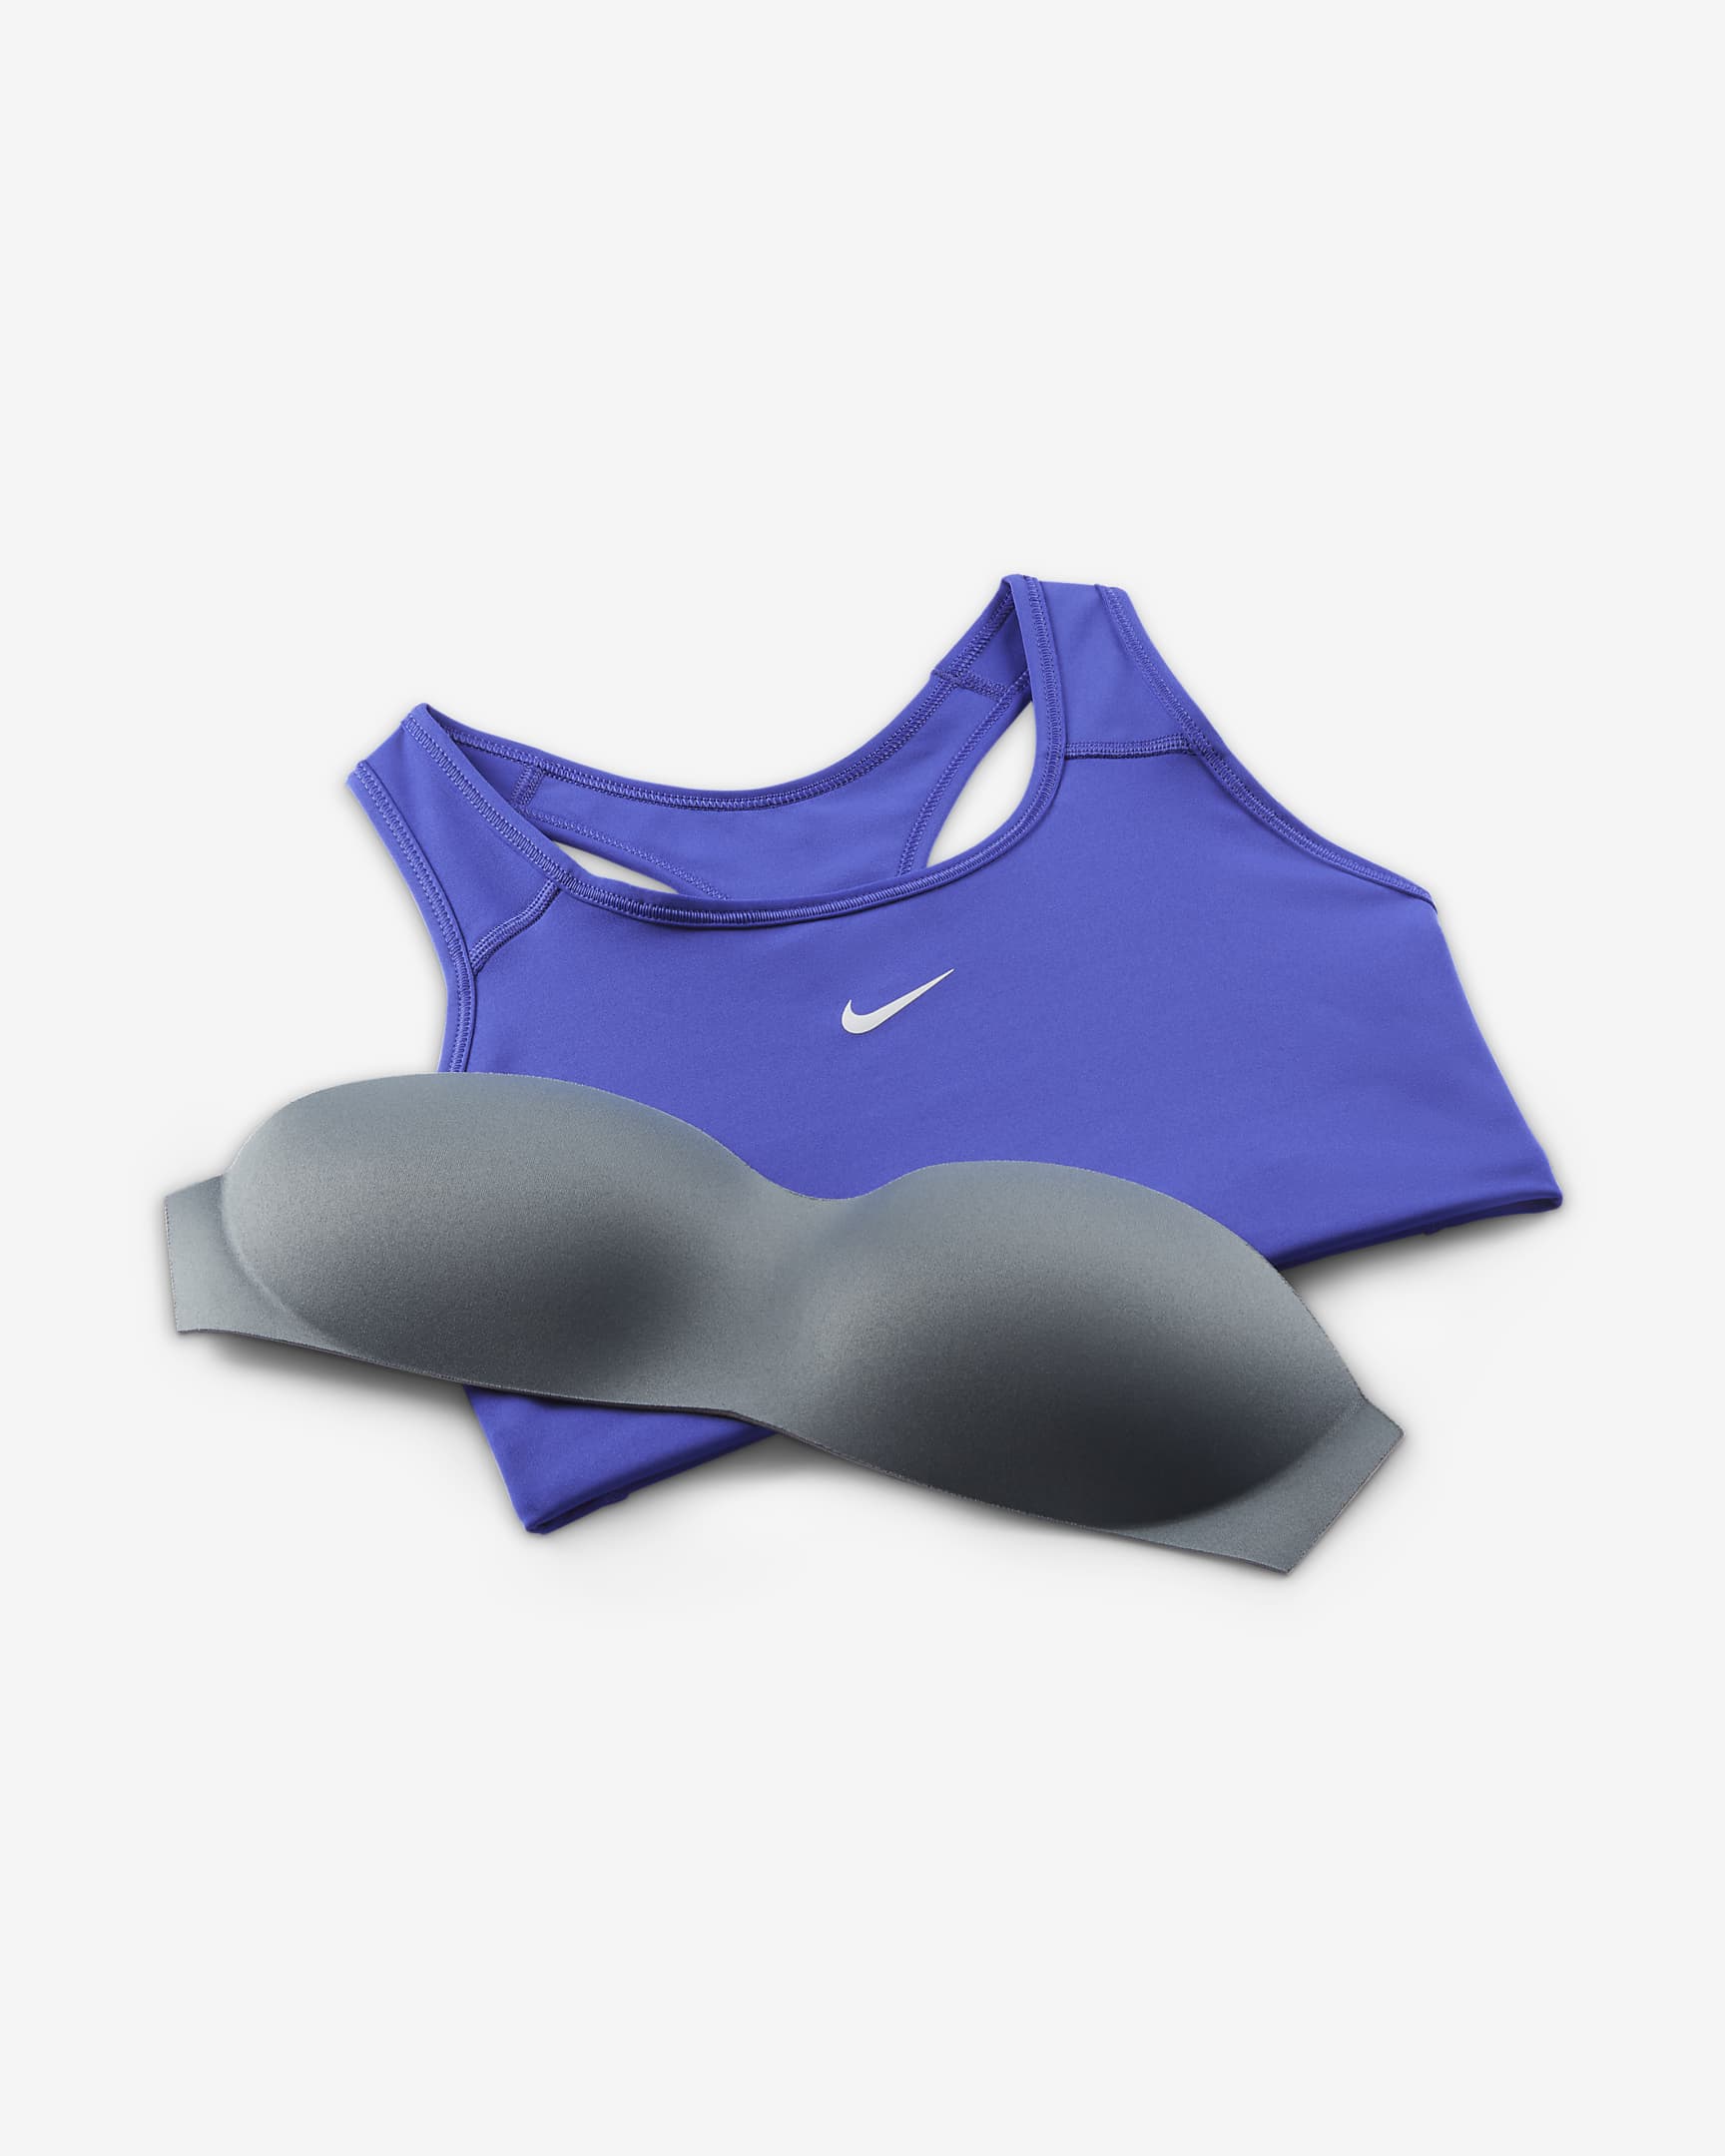 J.Mannequin - Just do it Nike bra Size:36 small cups Kshs:450